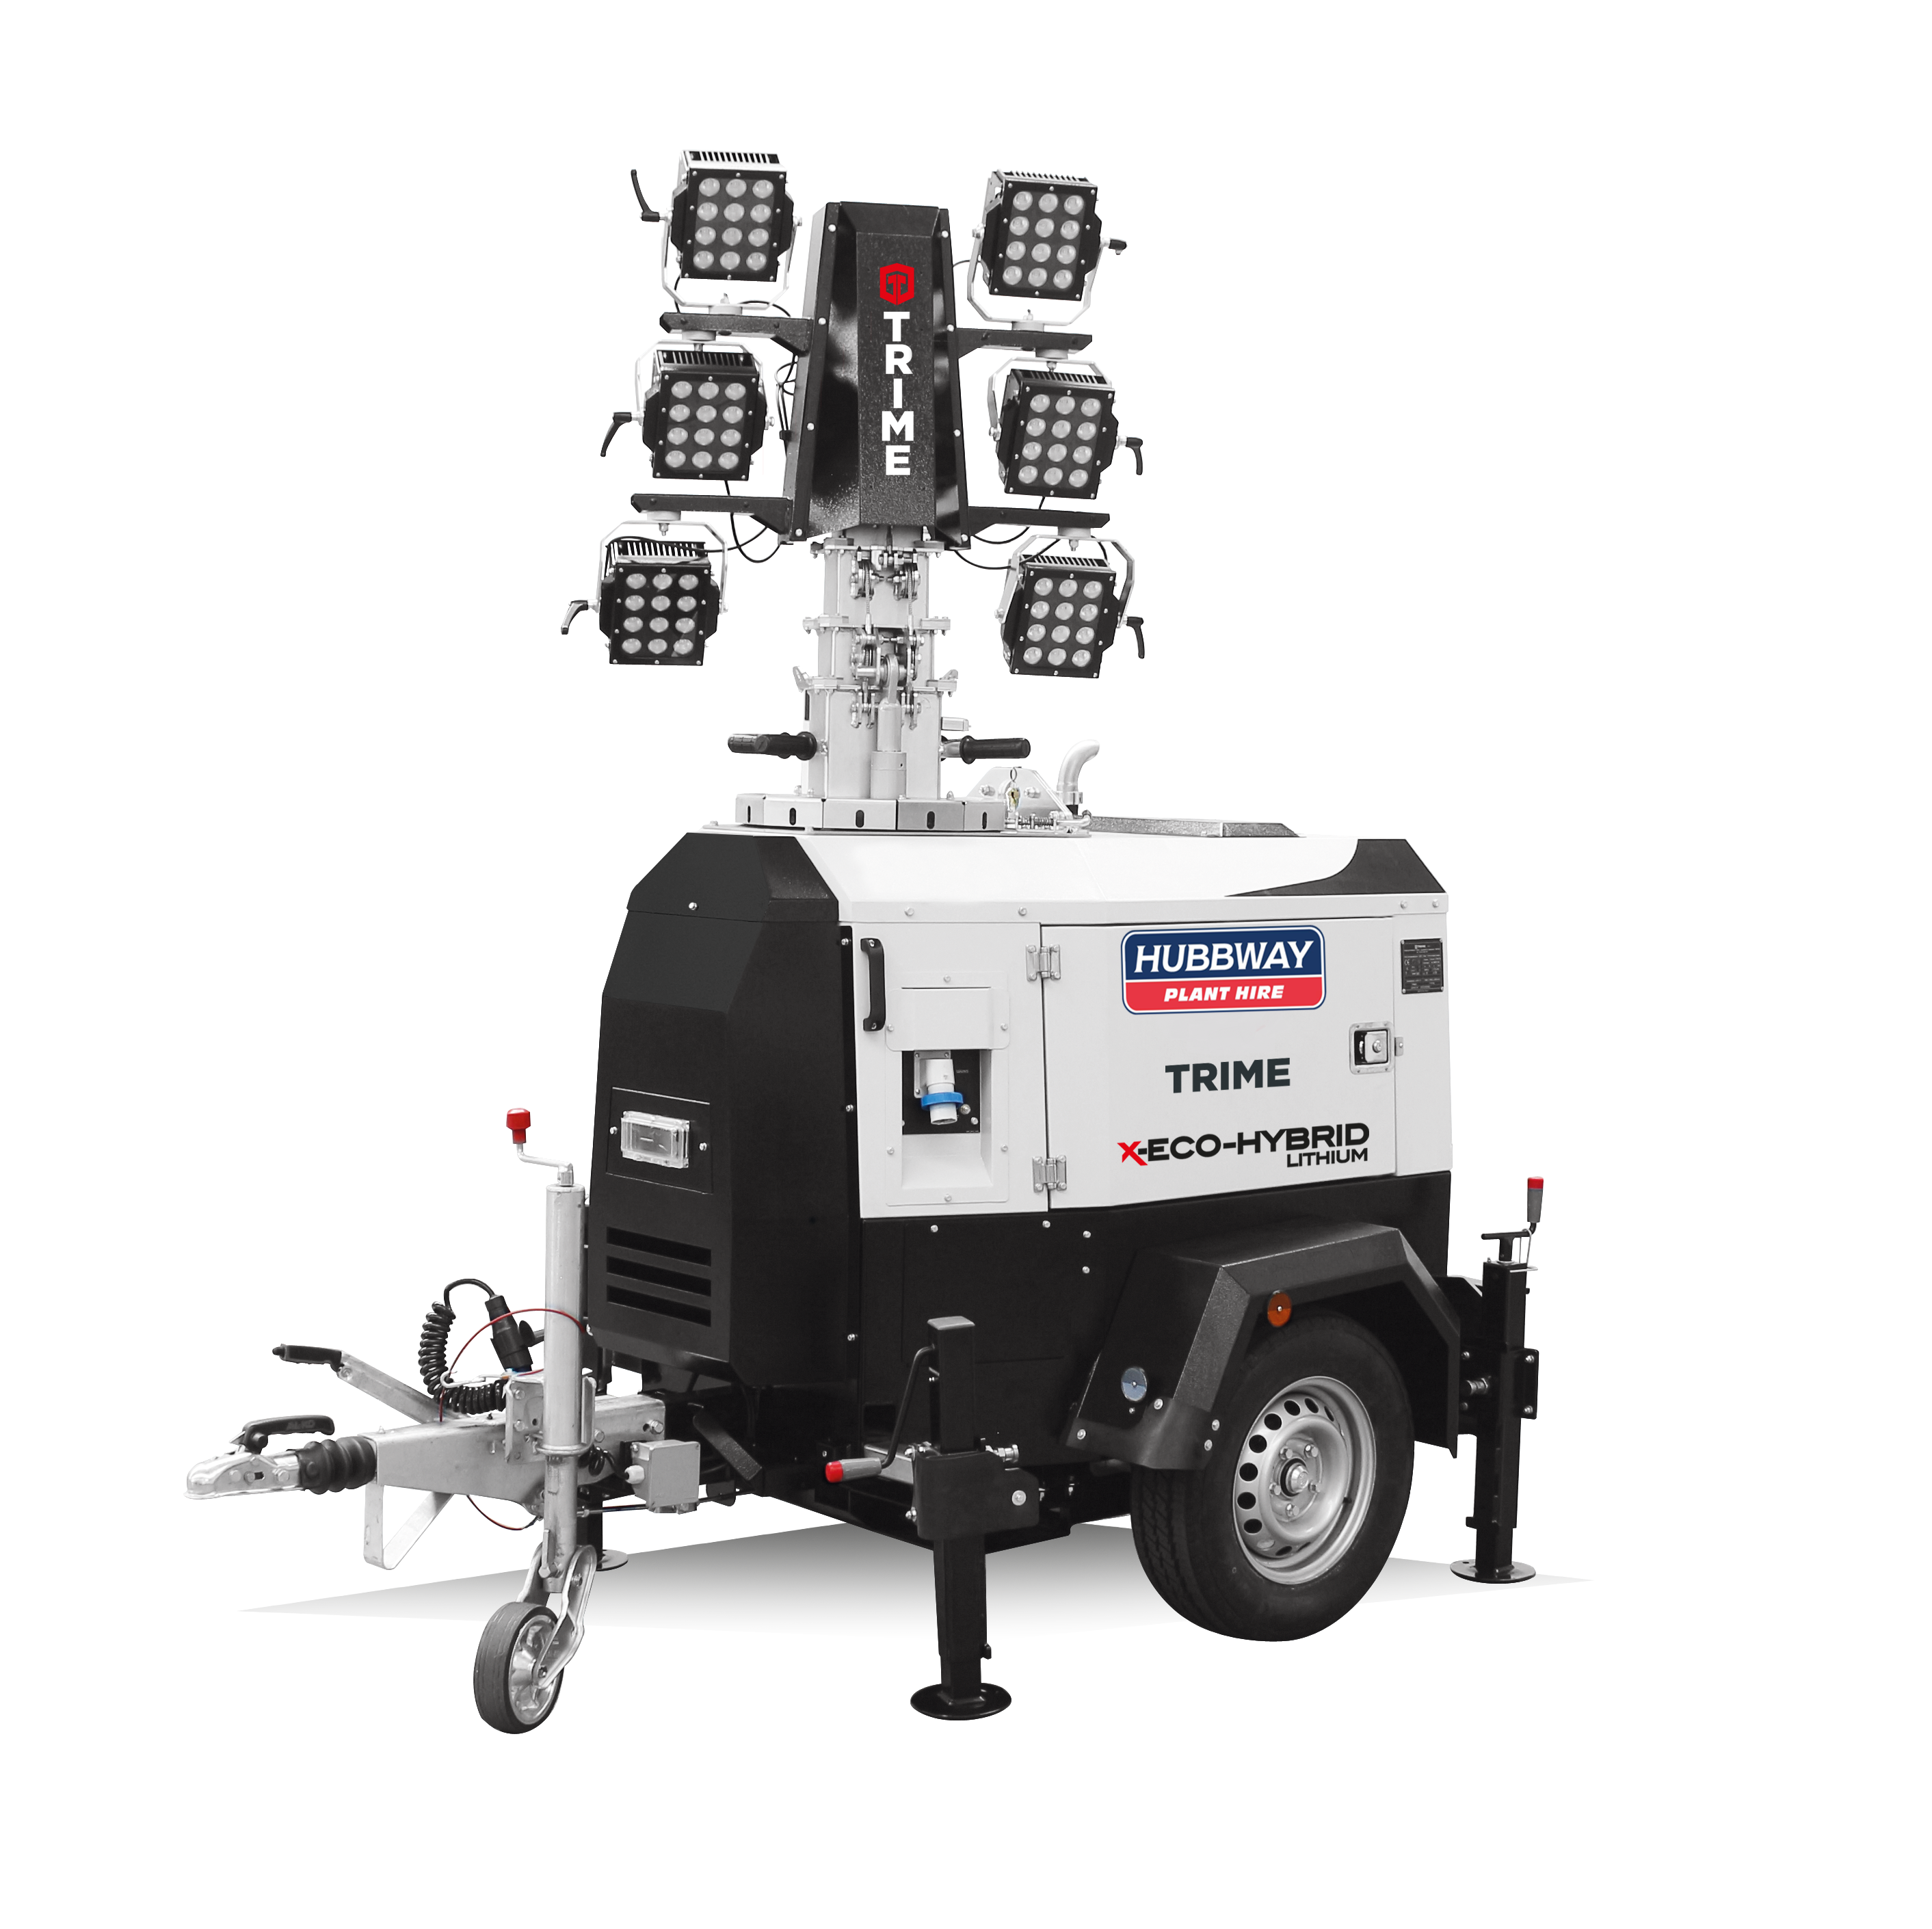 Hubbway Hire keep quiet about their latest investment in our lighting towers